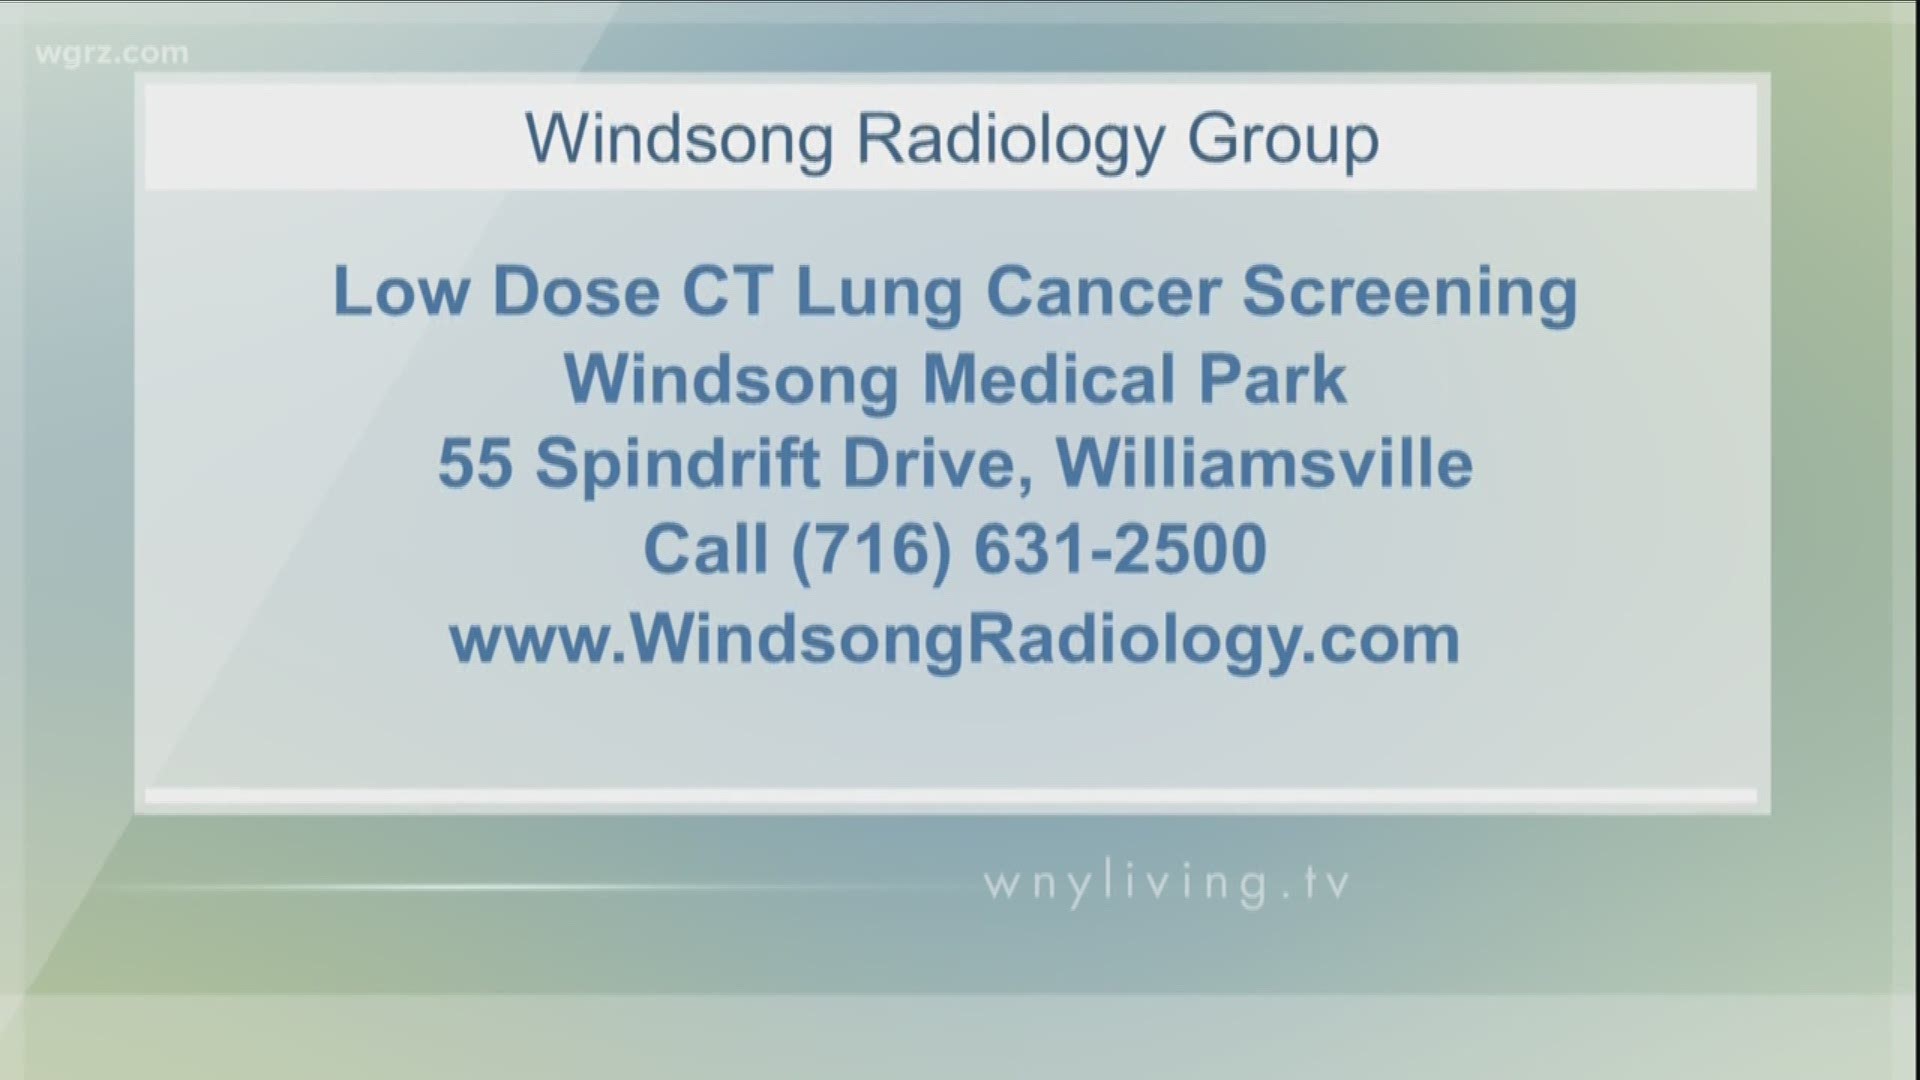 WNY Living - June 15 - Windsong Radiology Group (SPONSORED CONTENT)